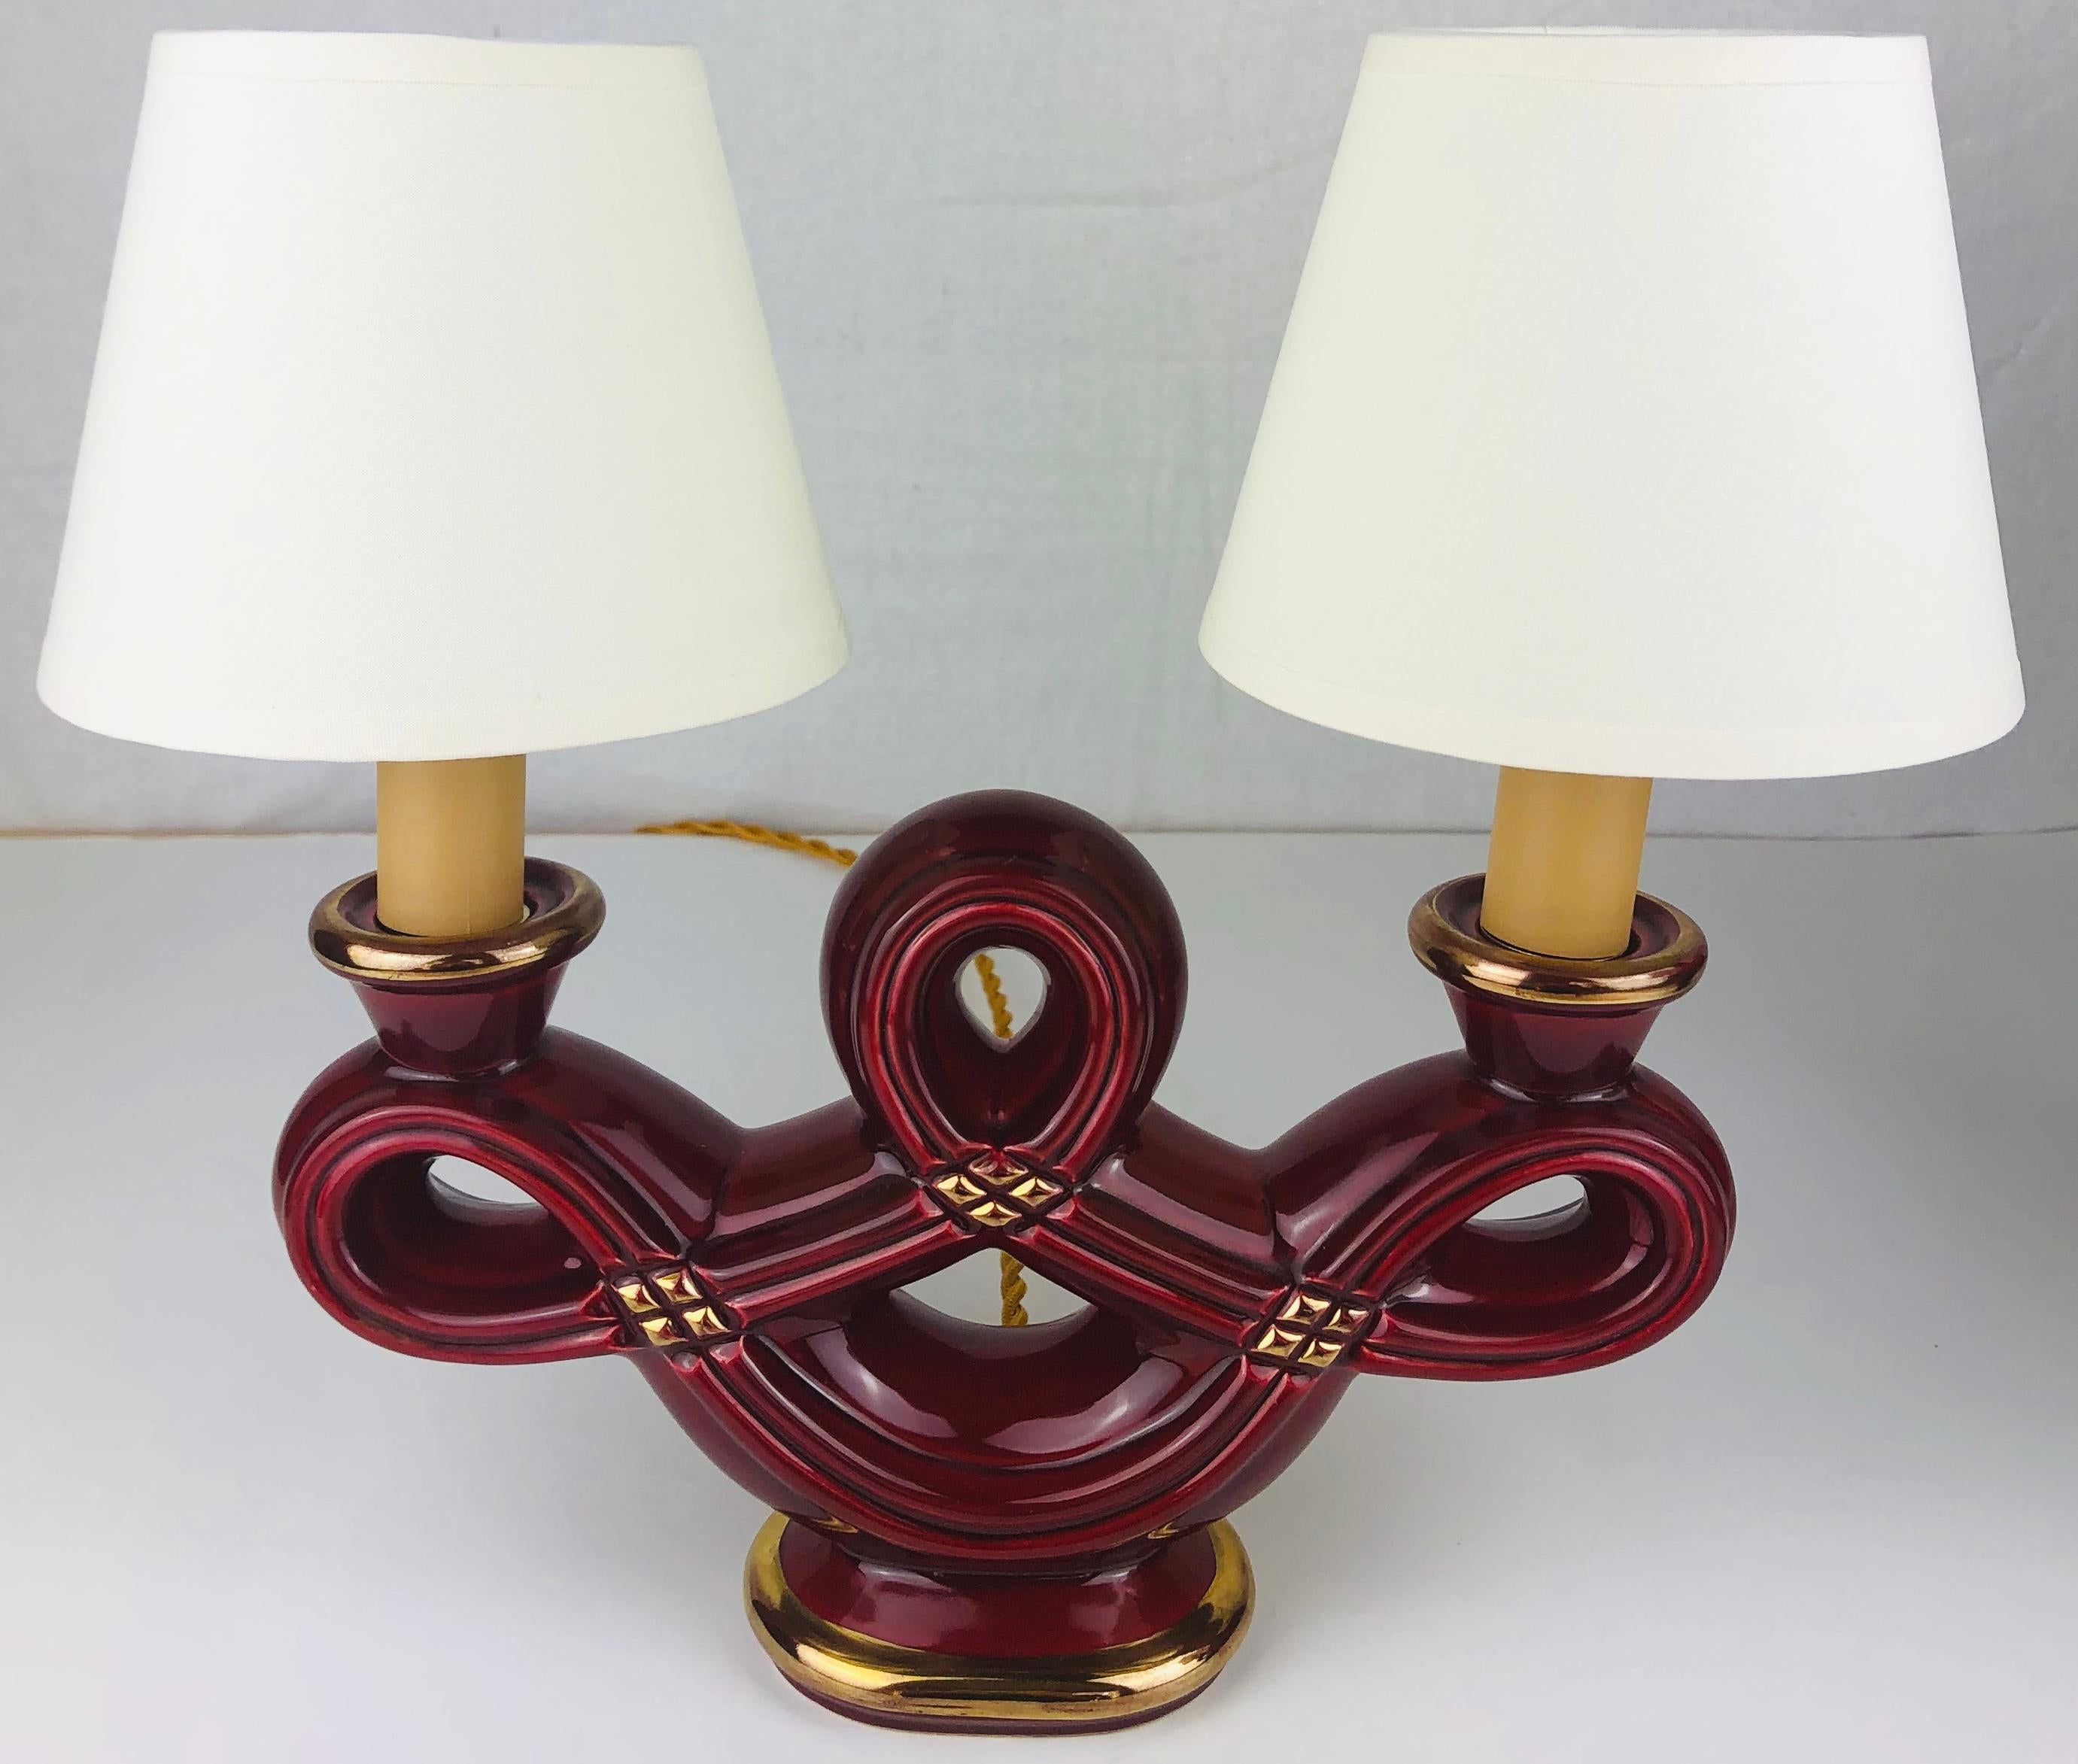 Very decorative pair of French Art Deco swirled faience candle stands converted to table lamps. These beautiful lamps are very good quality and in perfect condition.

The striking burgundy color with gold trim and diamond shaped details are very